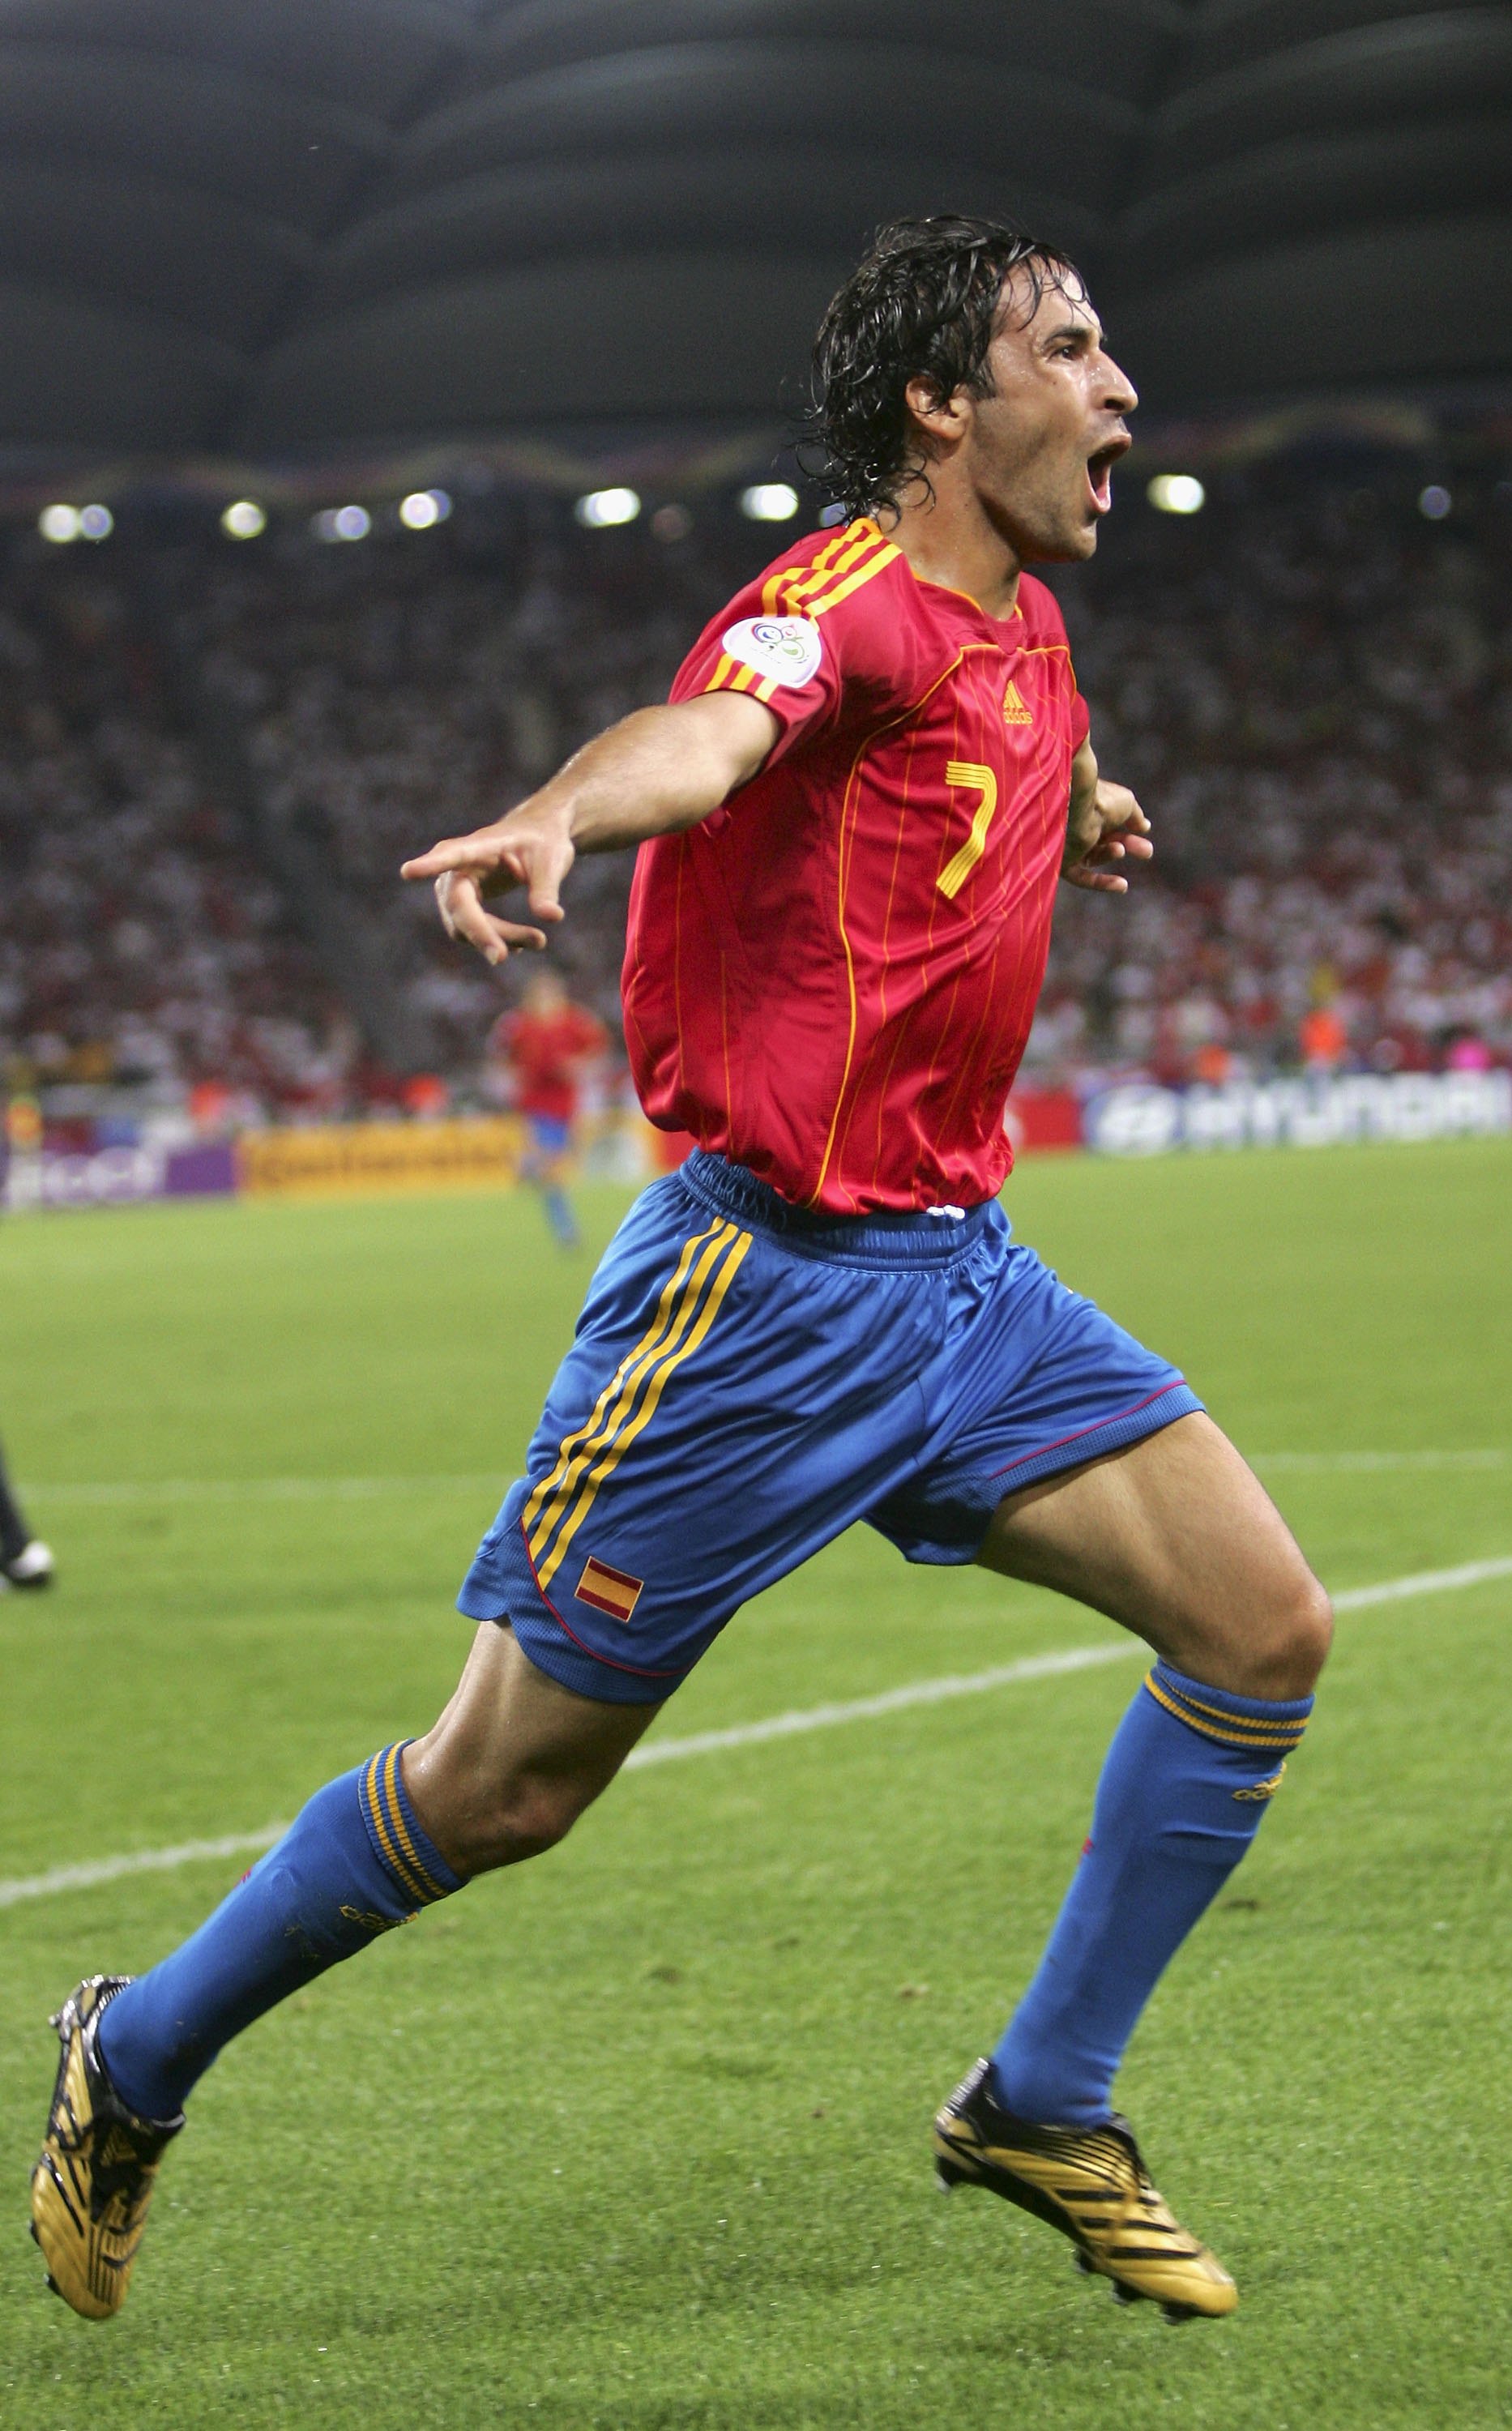 STUTTGART, GERMANY - JUNE 19:  Raul #7 of Spain celebrates, after scoring his team's equaliser during the FIFA World Cup Germany 2006 Group H match between Spain and Tunisia at the Gottlieb-Daimler Stadium on June 19, 2006 in Stuttgart, Germany.  (Photo b